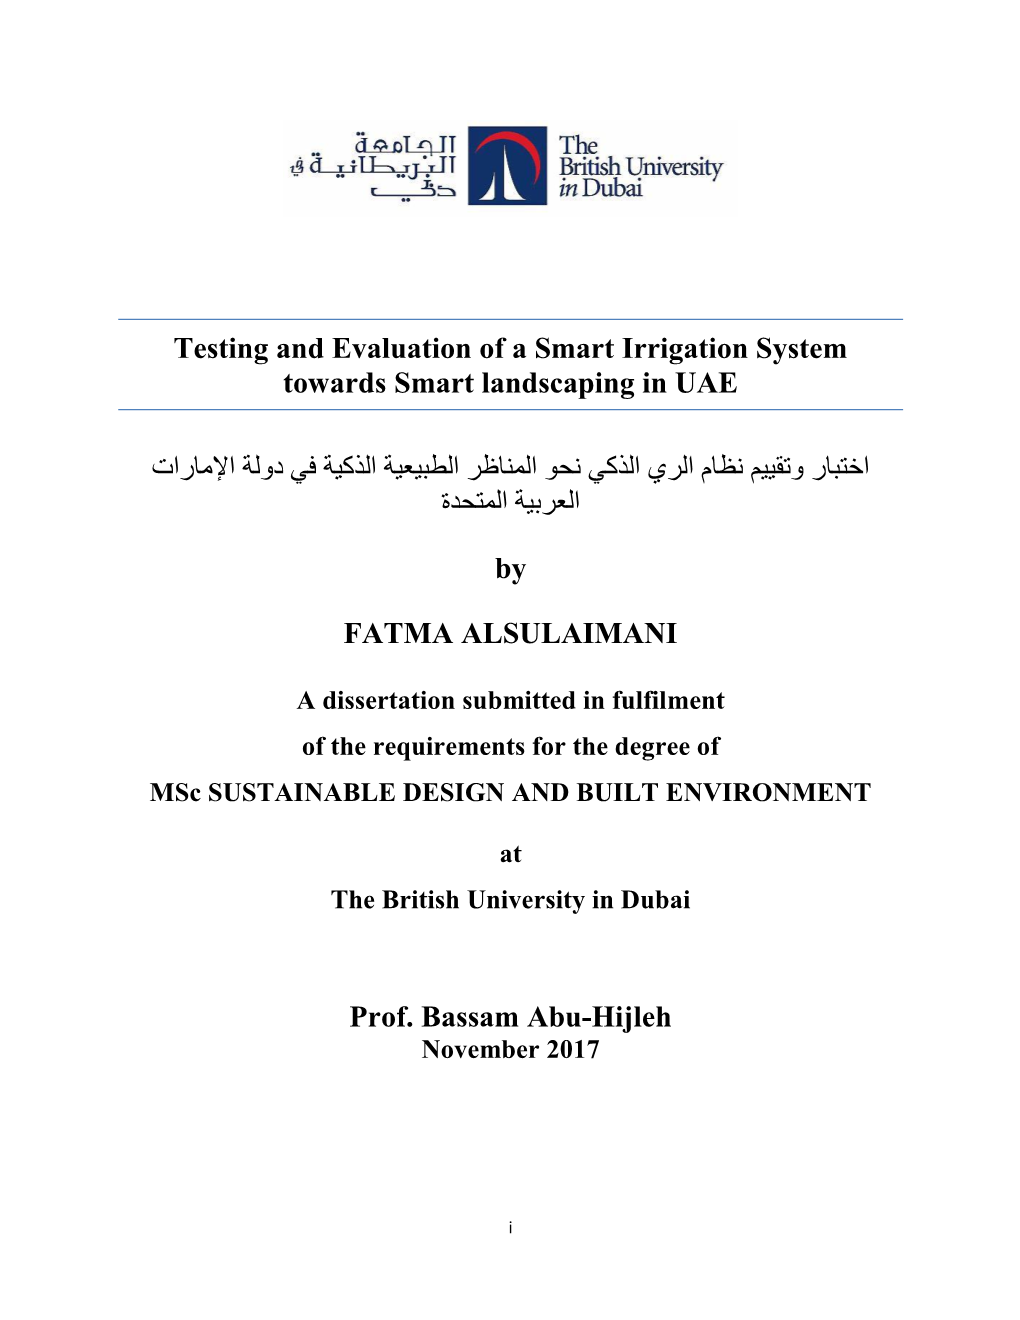 Testing and Evaluation of a Smart Irrigation System Towards Smart Landscaping in UAE